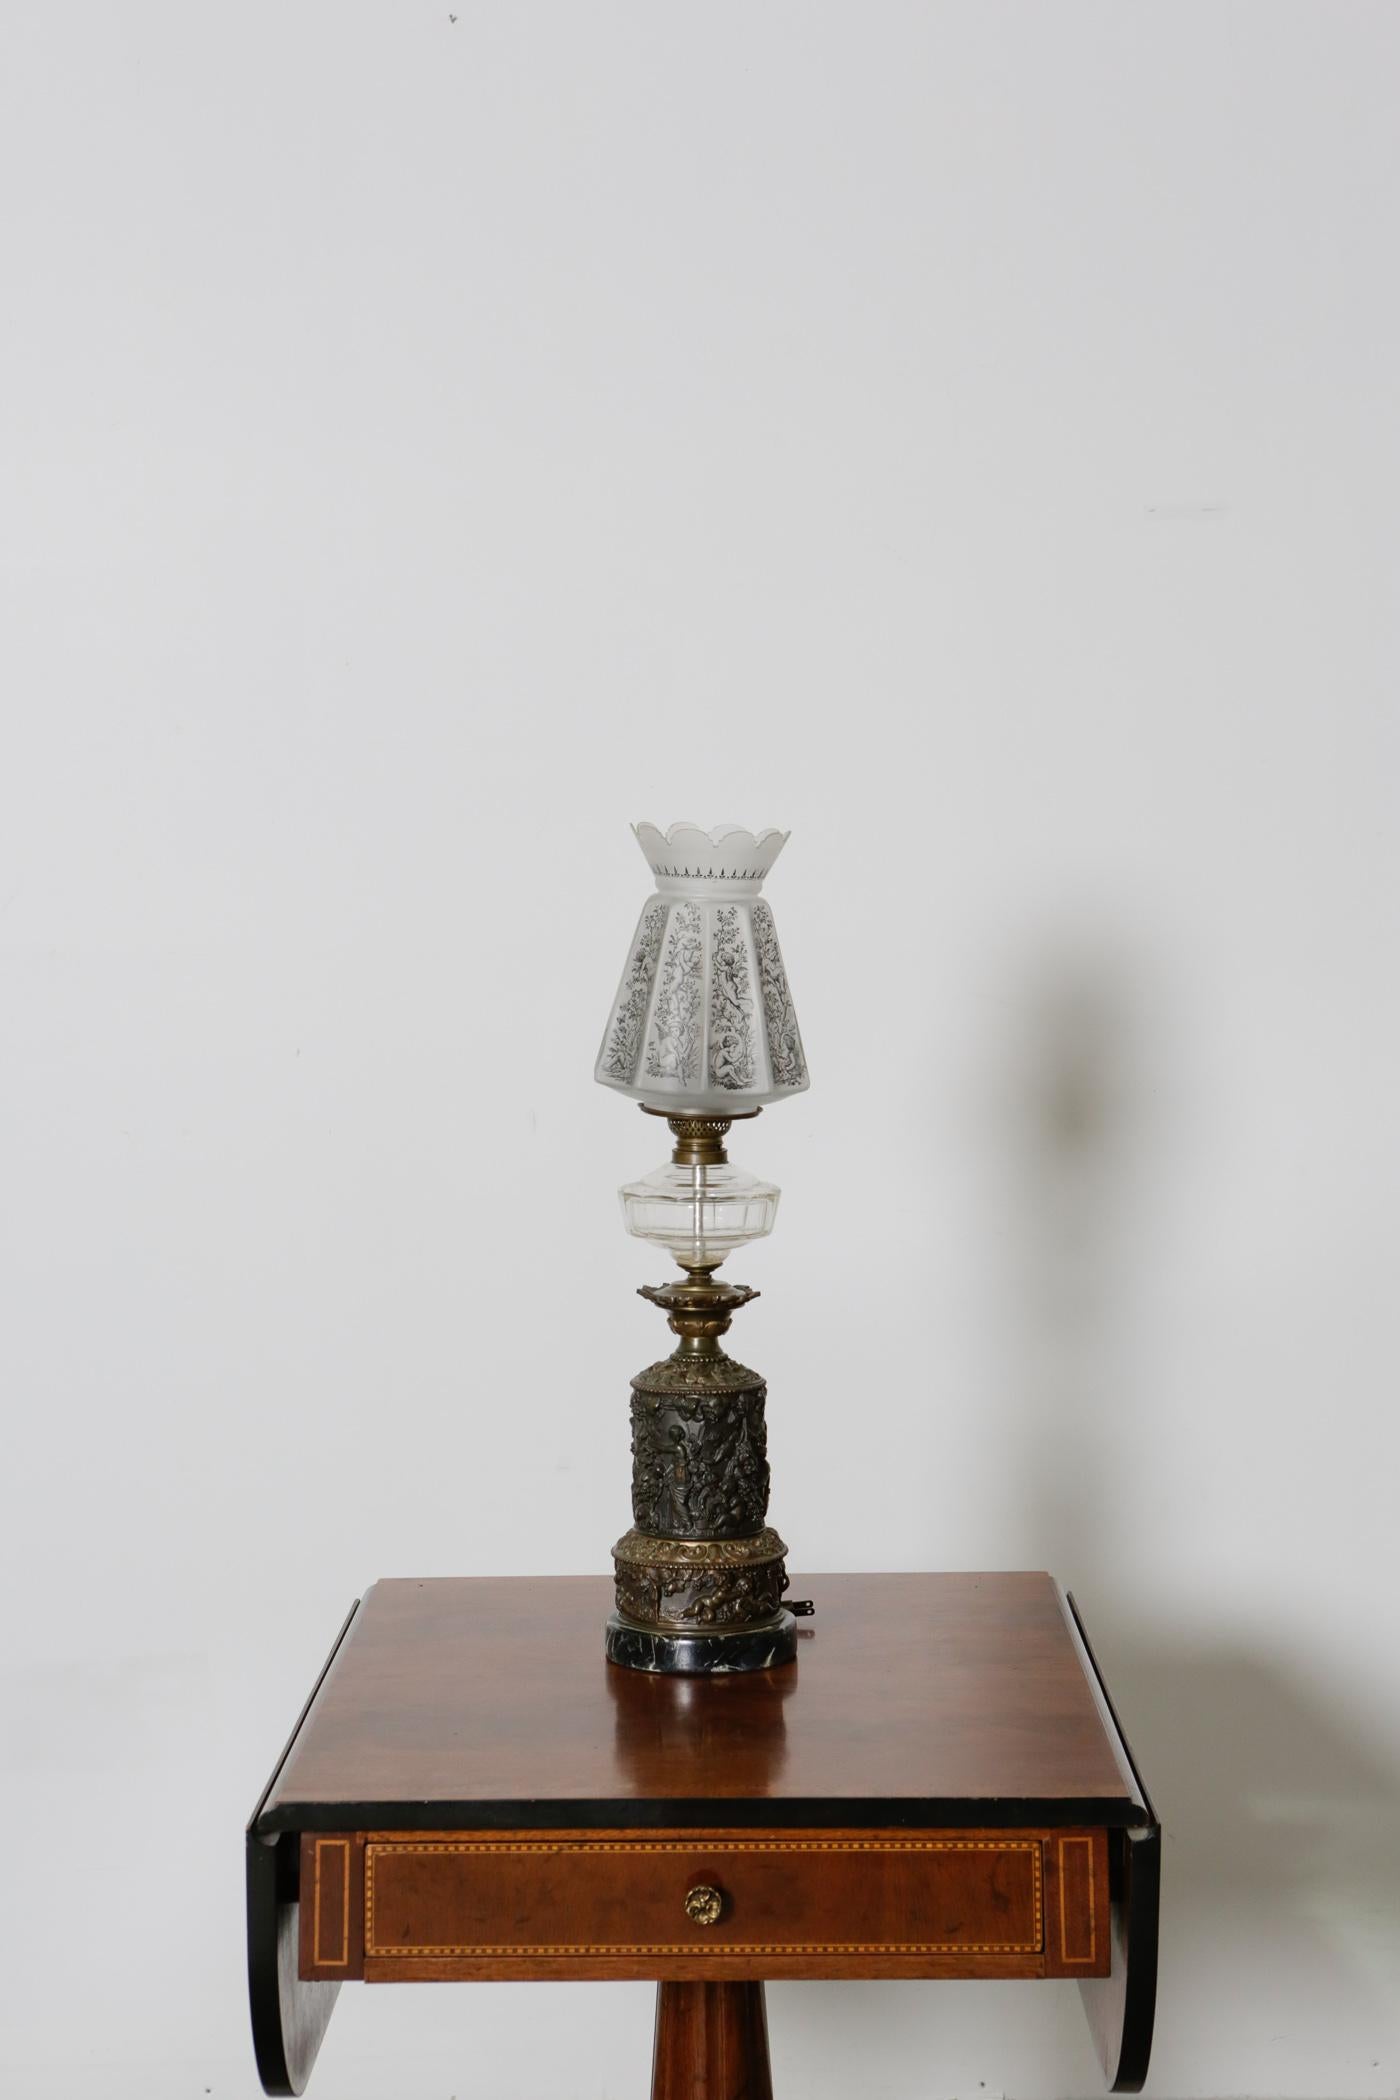 19th century French bronze oil table lamp with frosted glass shade.

This highly detailed elegant bronze antique oil lamp is complemented with an angelic floral frosted glass shade. Rare and true antique piece with full of history. This will add a